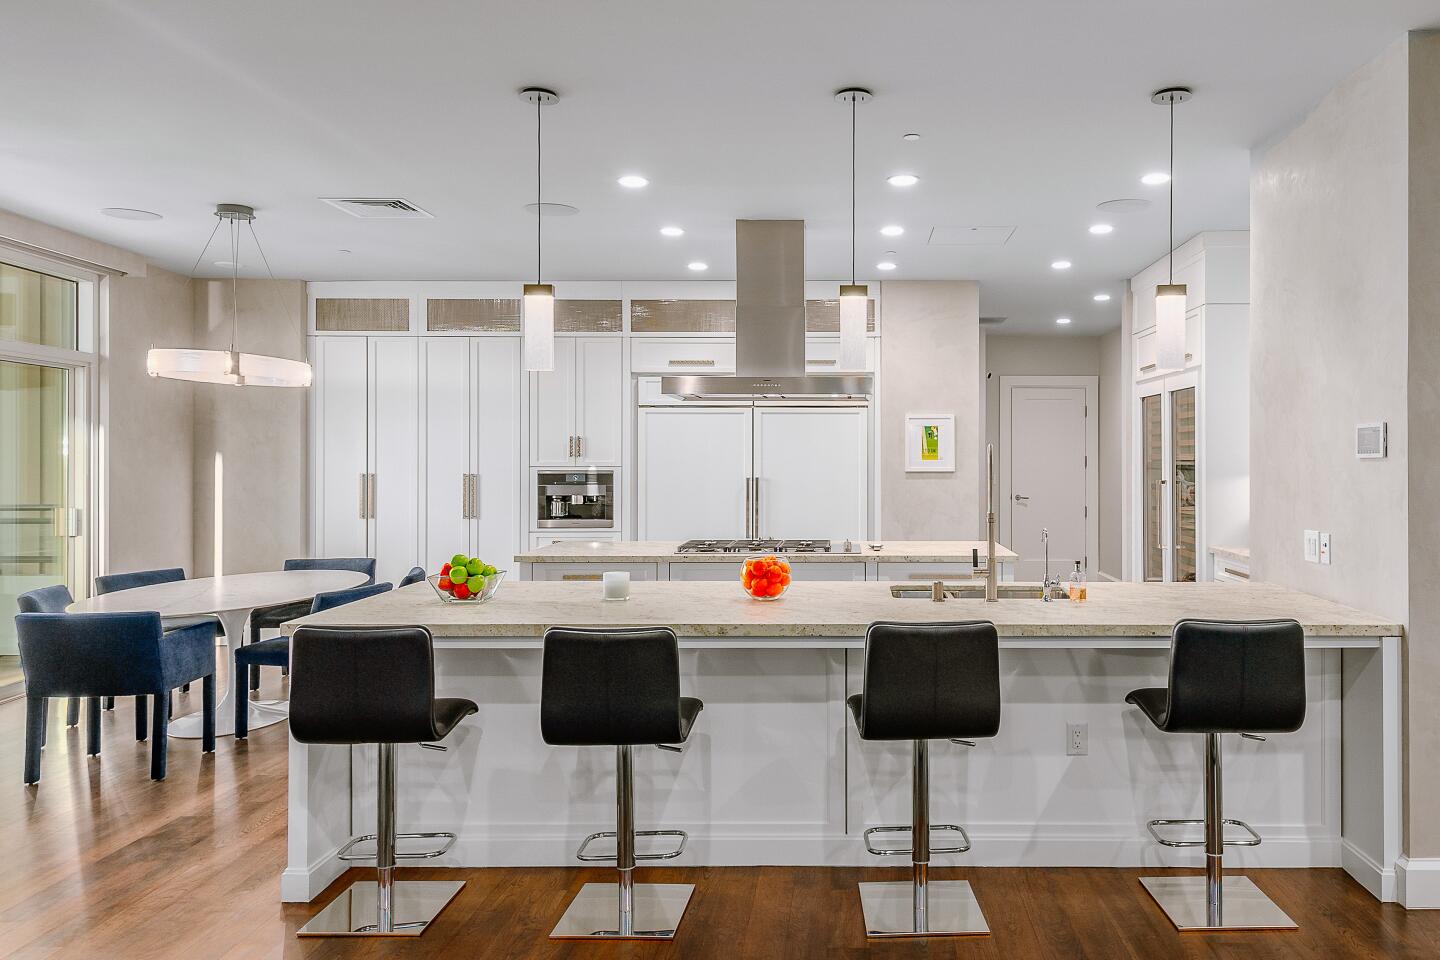 A large kitchen with white appliances includes an island with seating for four.